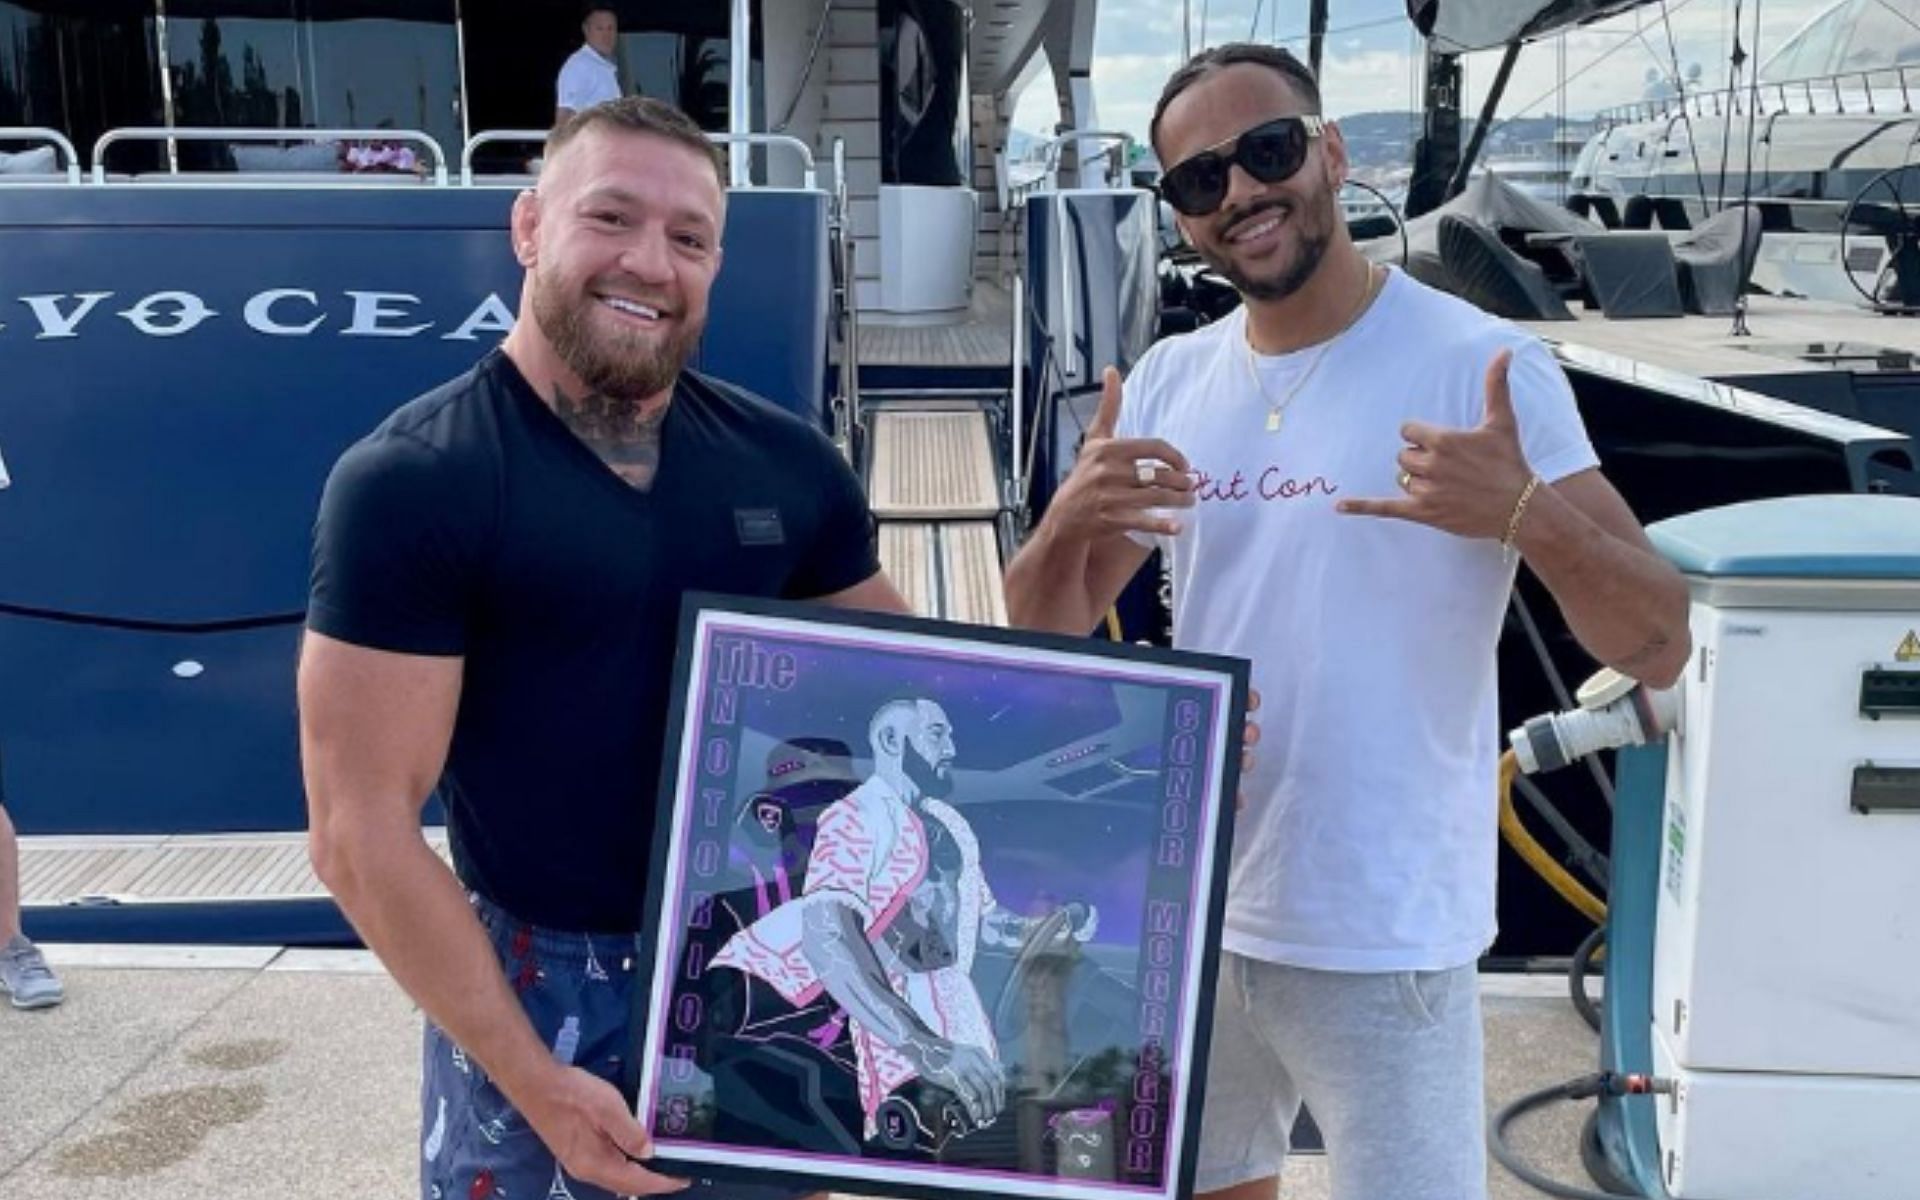 Conor McGregor (left and Alex Traterrestre (right) [Image courtesy of @al_extraterrestre on Instagram]